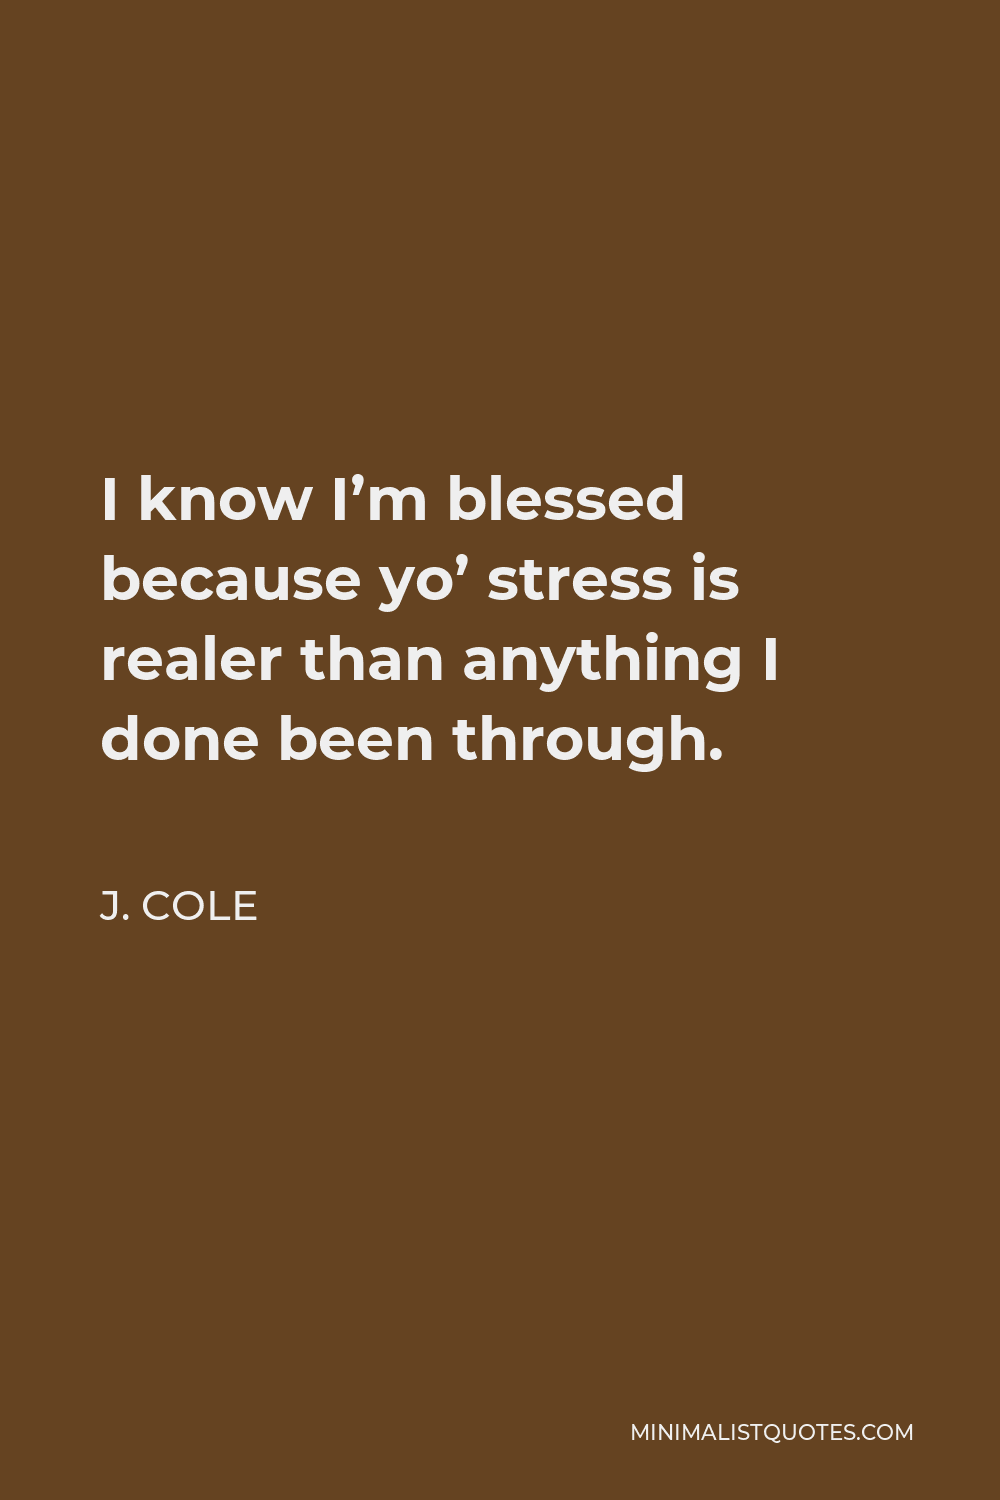 J. Cole Quote - I know I’m blessed because yo’ stress is realer than anything I done been through.